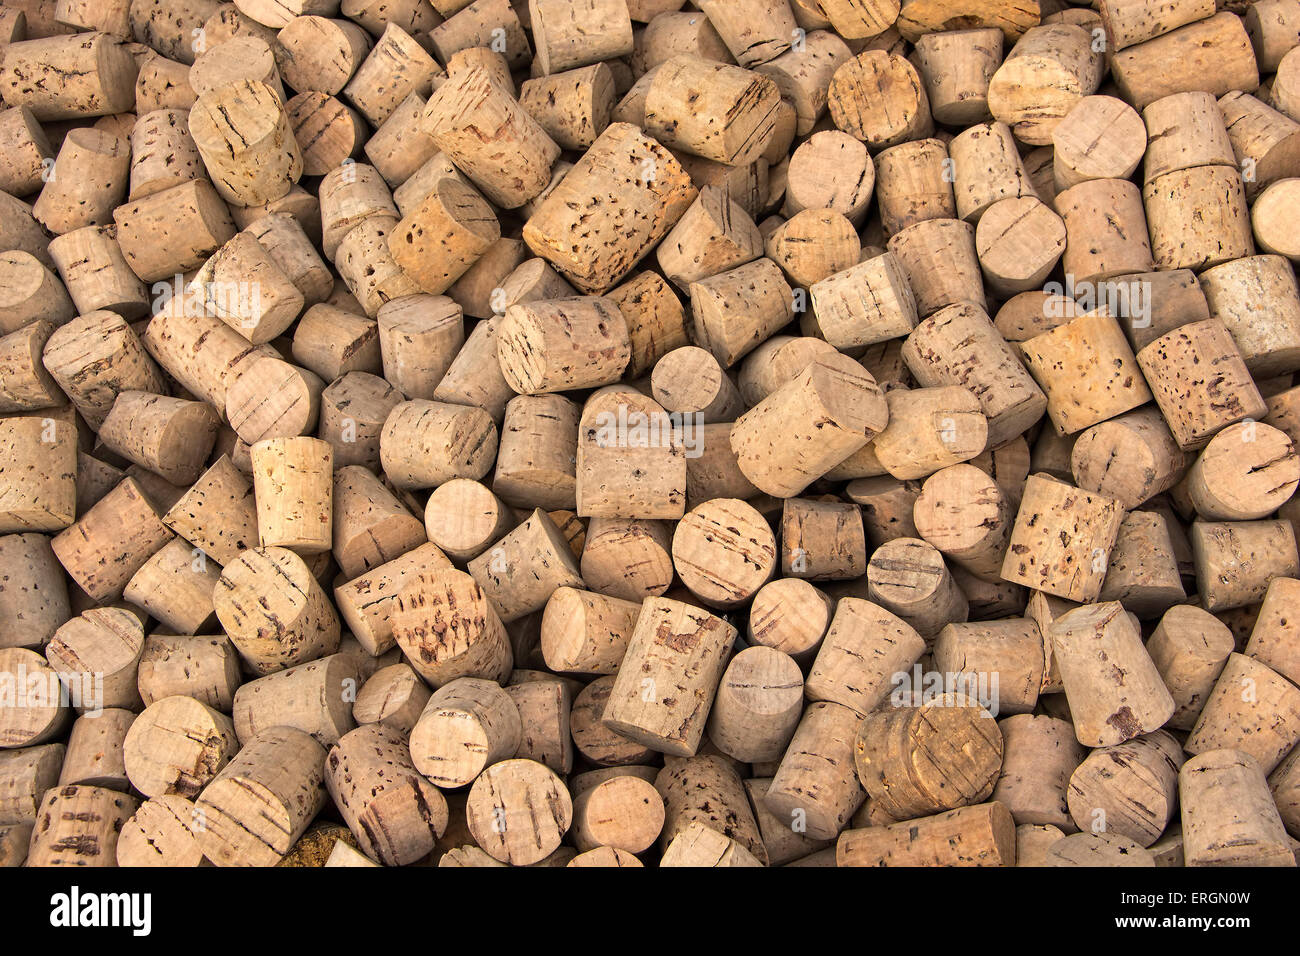 Collection of one hundred years old vintage and grunge corks from home-made winery. Stock Photo